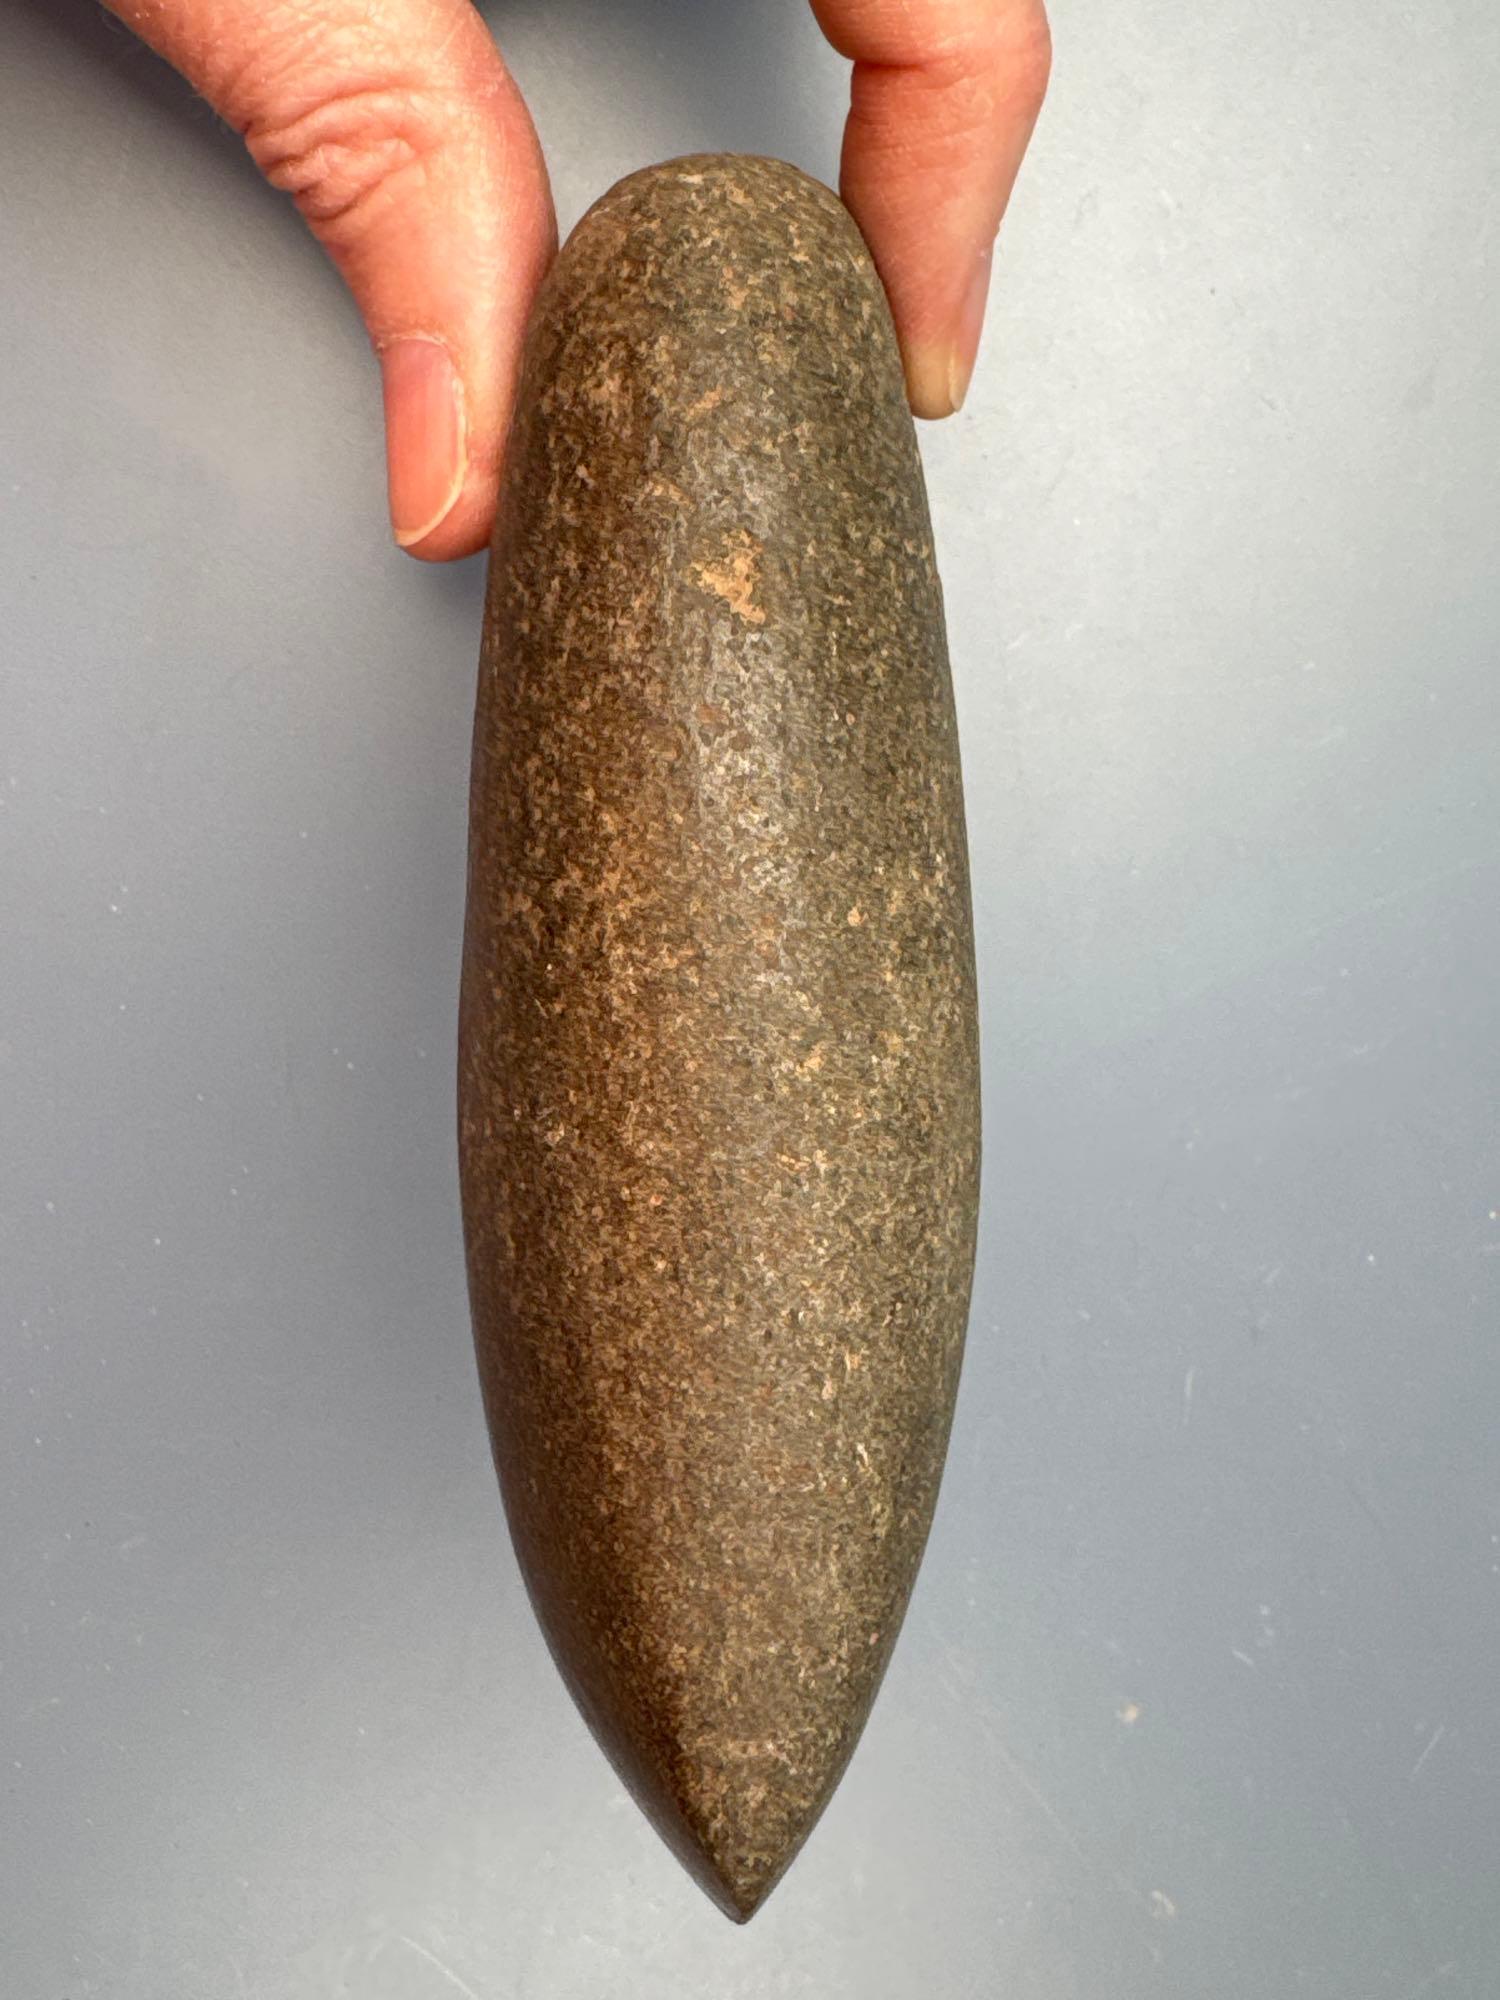 4 3/4" Flared Bit Celt, Polished Bit, This and others were found in fields next to the Conn. River i